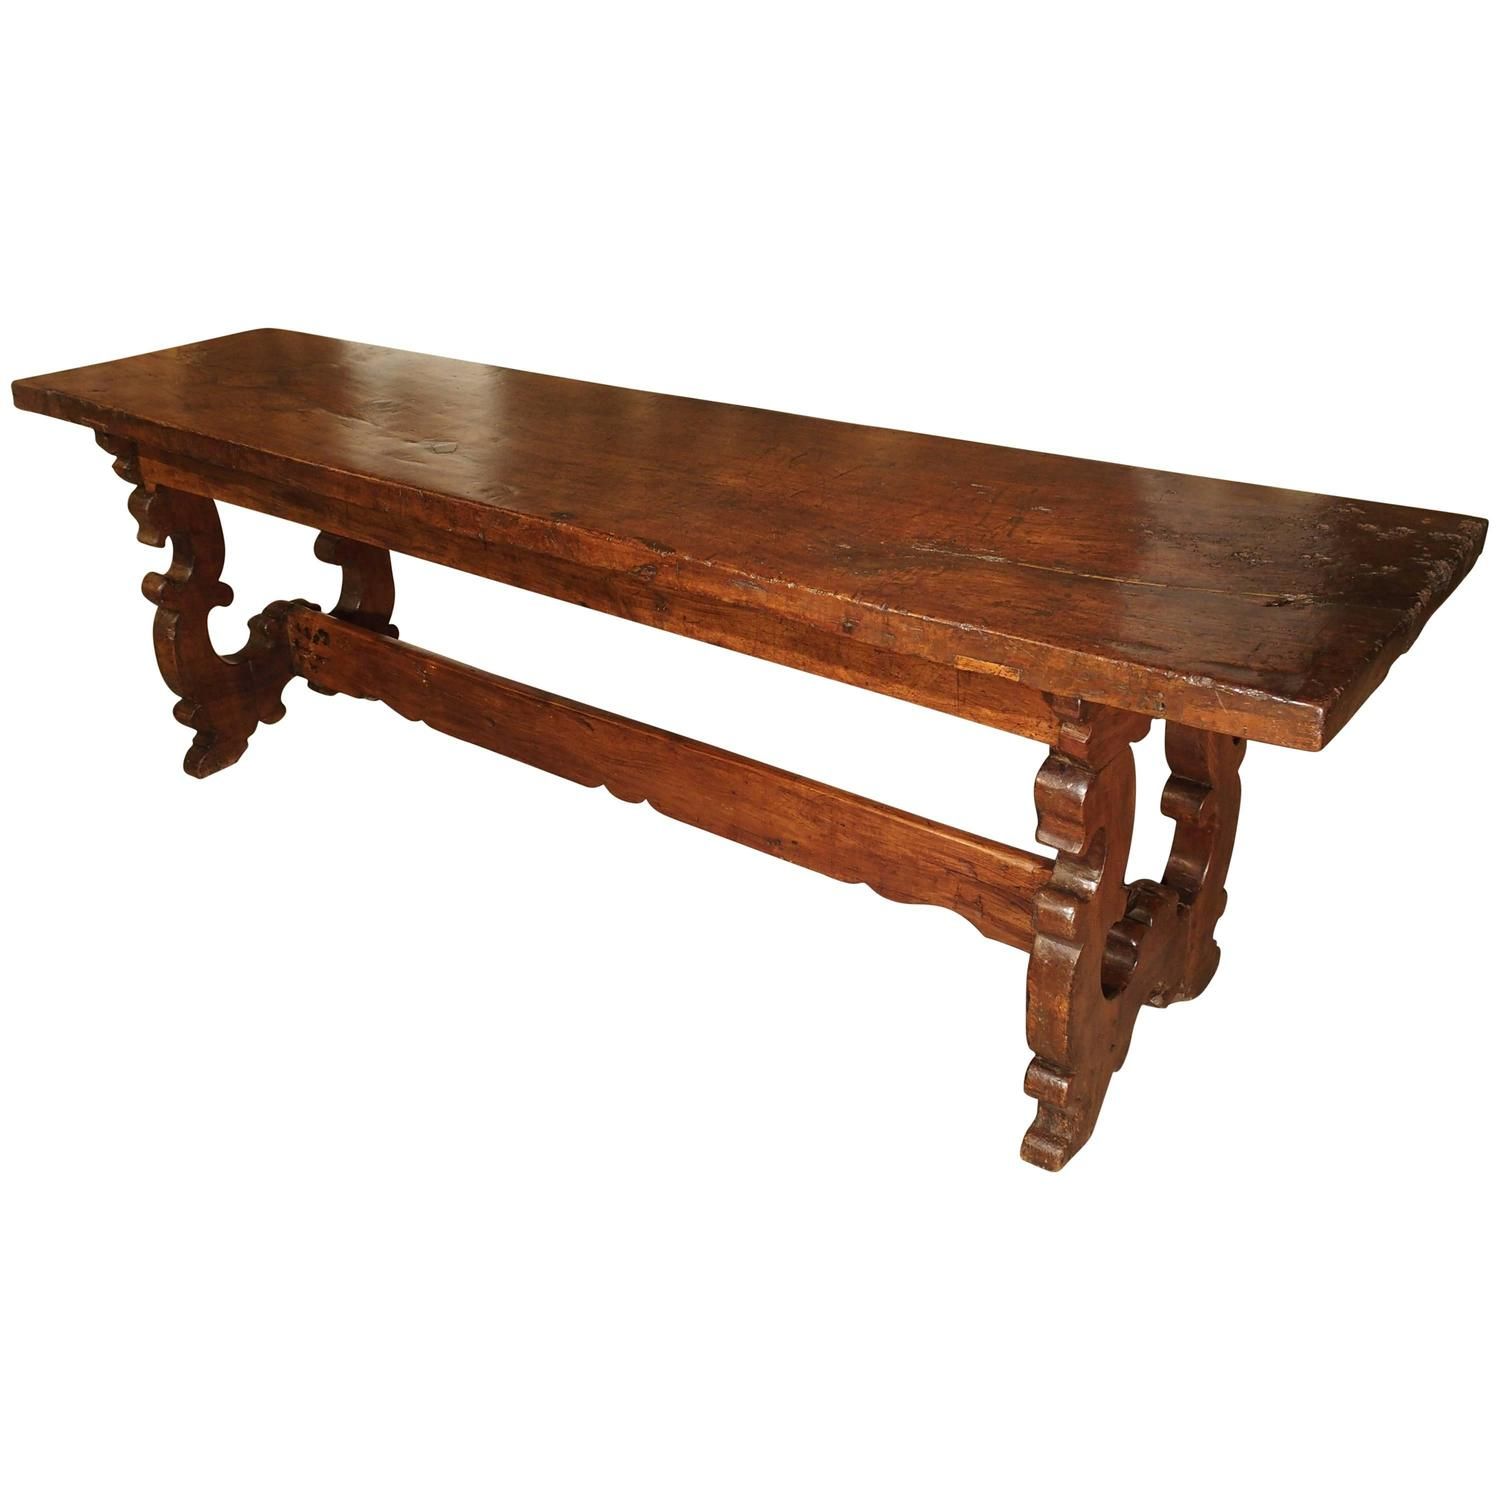 Antique Walnut Wood Console Table From Italy, 1600s For With Rustic Walnut Wood Console Tables (View 5 of 20)